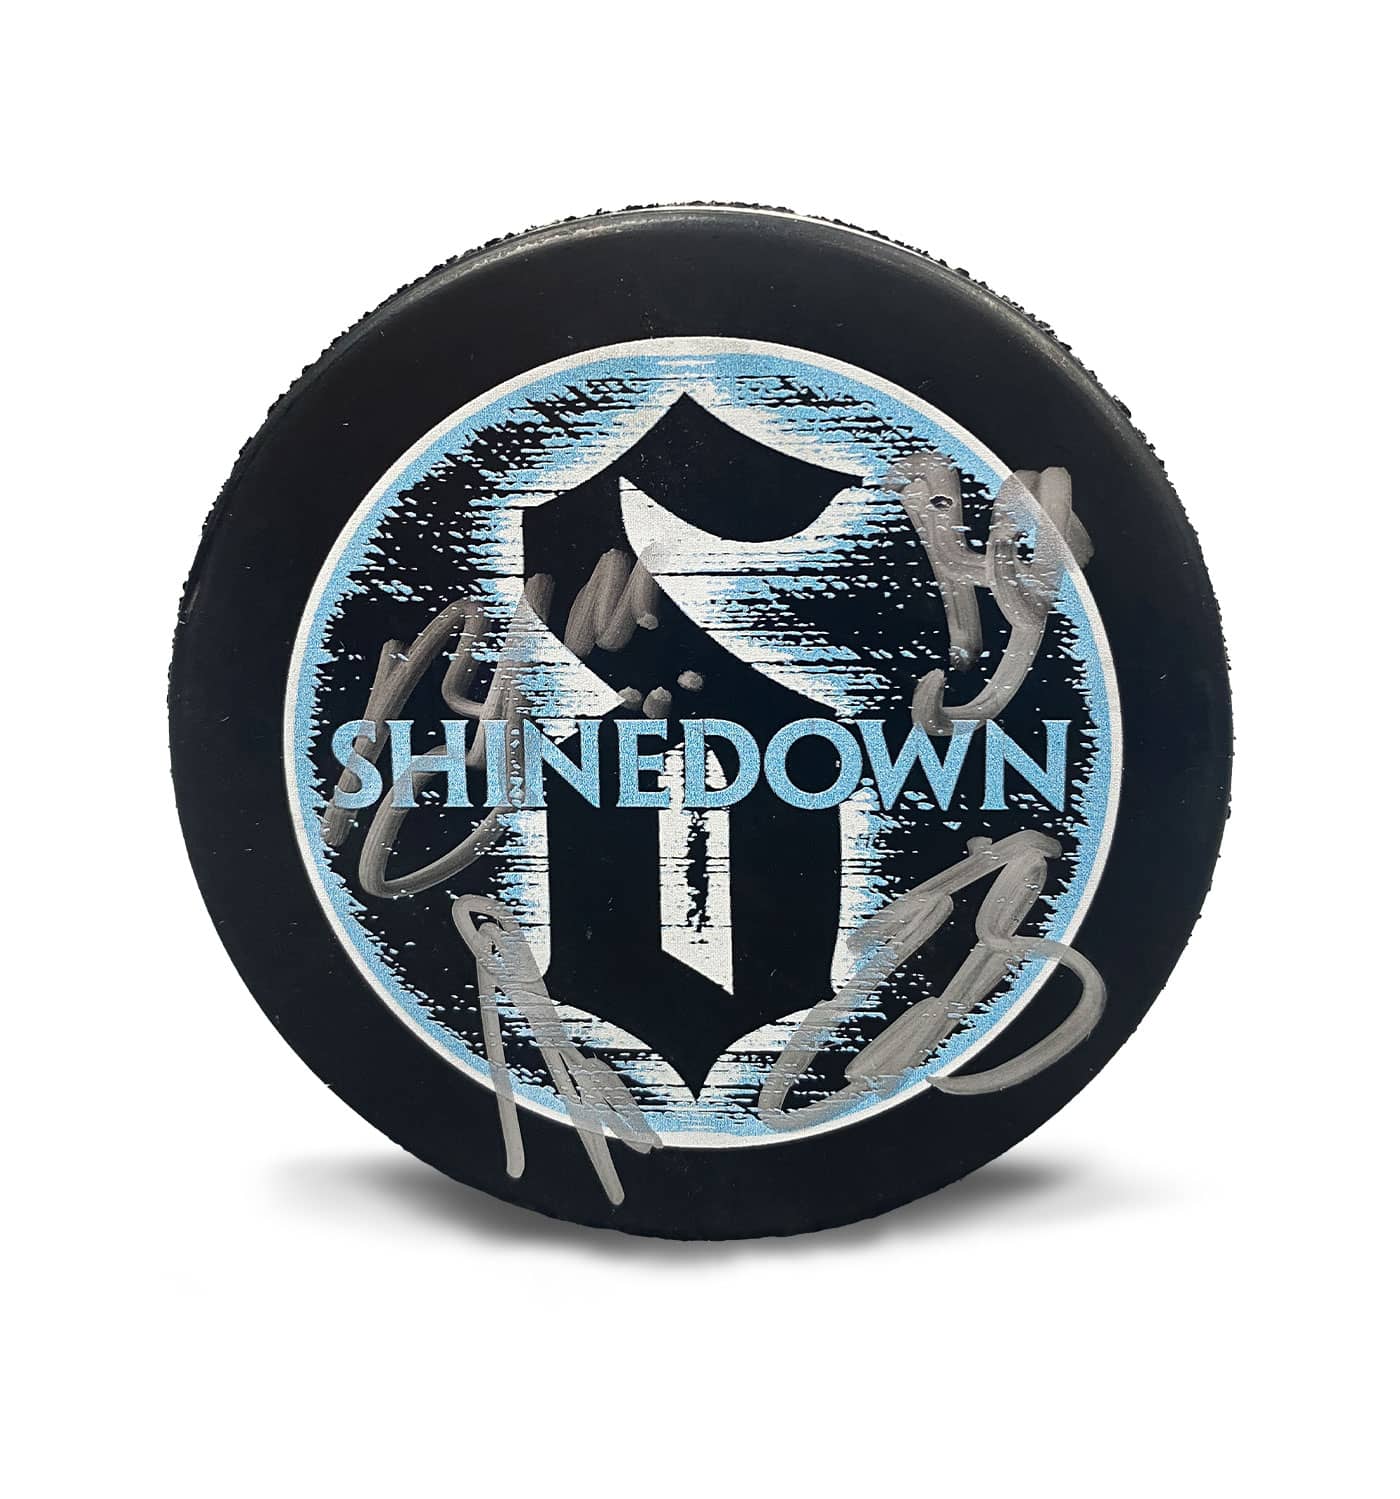 SHINEDOWN ‘ADRENALINE’ limited edition autographed hockey puck